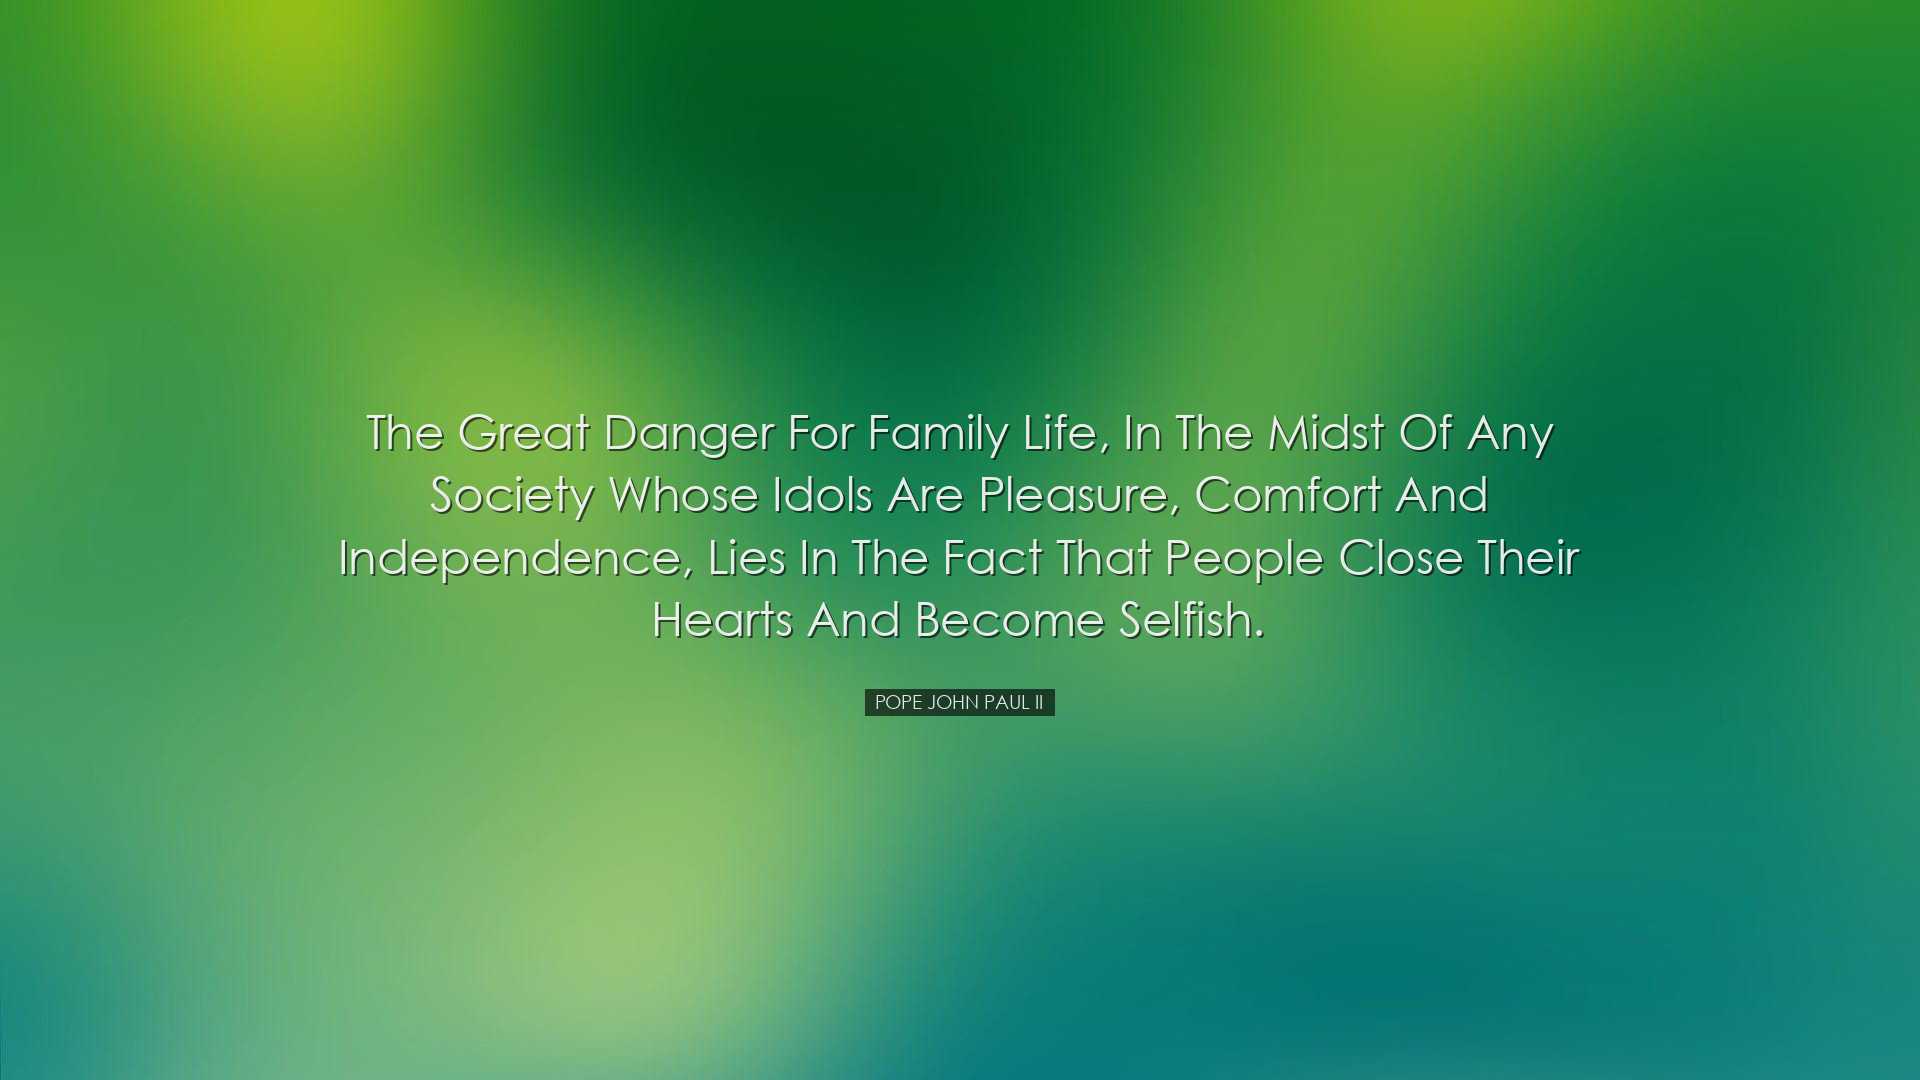 The great danger for family life, in the midst of any society whos